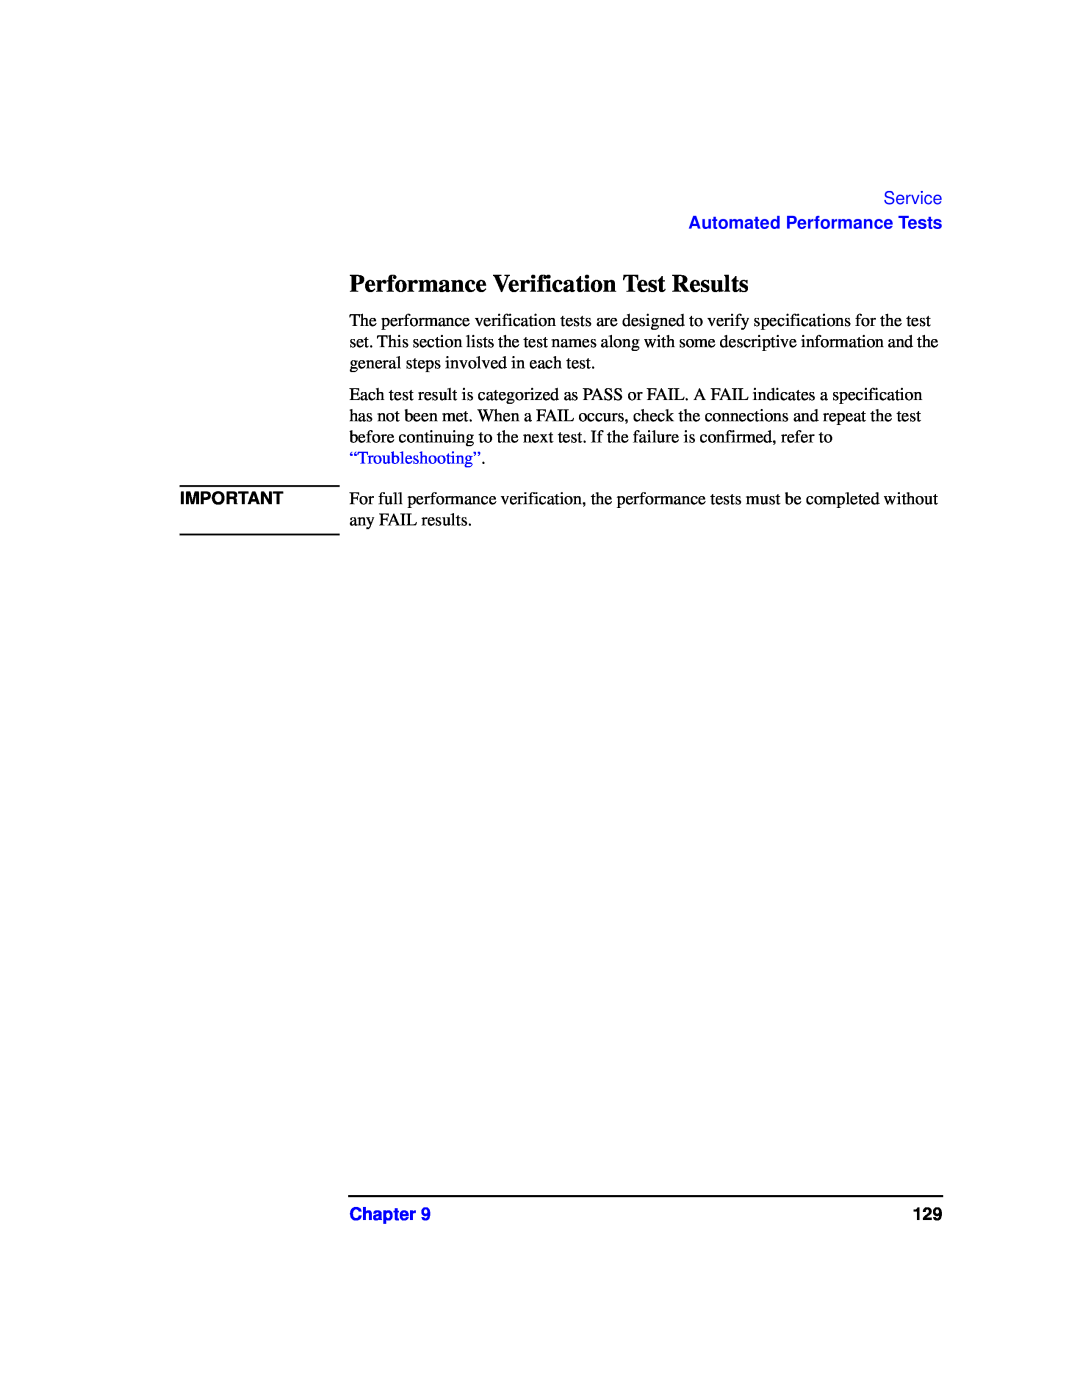 Agilent Technologies 87075C manual Performance Verification Test Results, Service, Automated Performance Tests, Chapter 